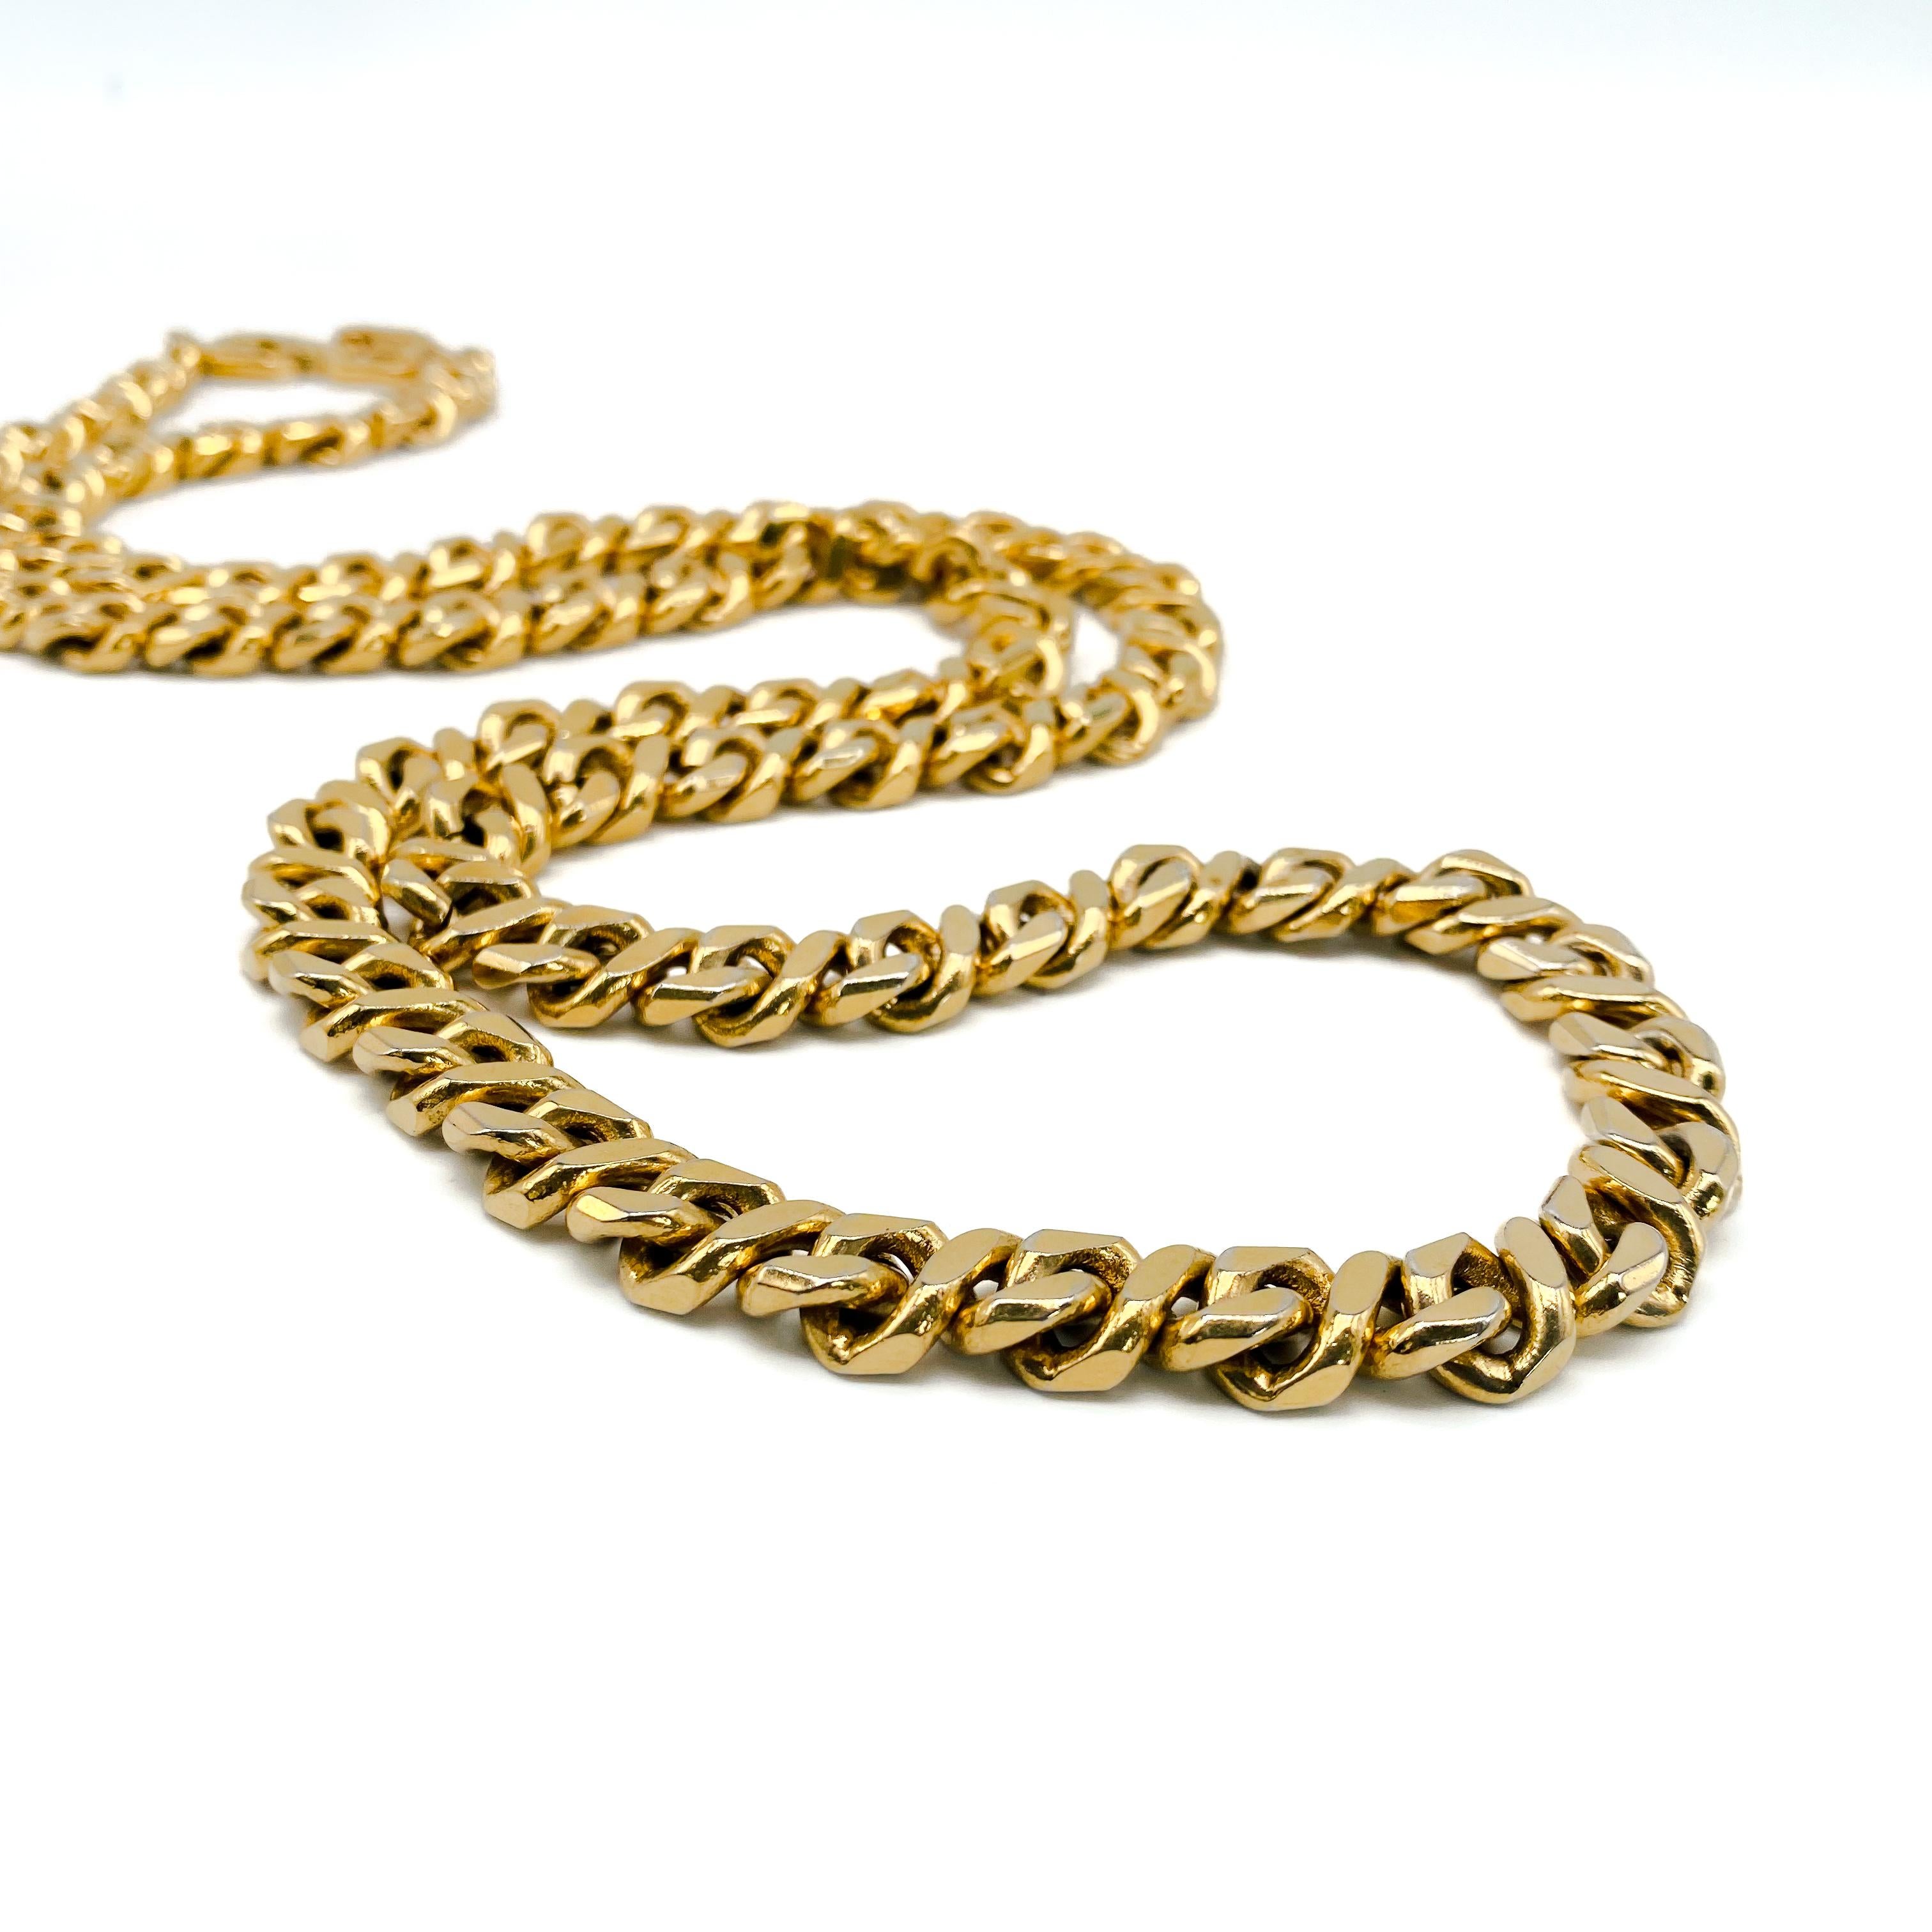 Givenchy Vintage Necklace 1980s

This amazing heavyweight chain is from the legendary house of Hubert de Givenchy. Cast from high quality gold plated metal, this chain will add a cool contemporary edge to any outfit

Givenchy are known for producing